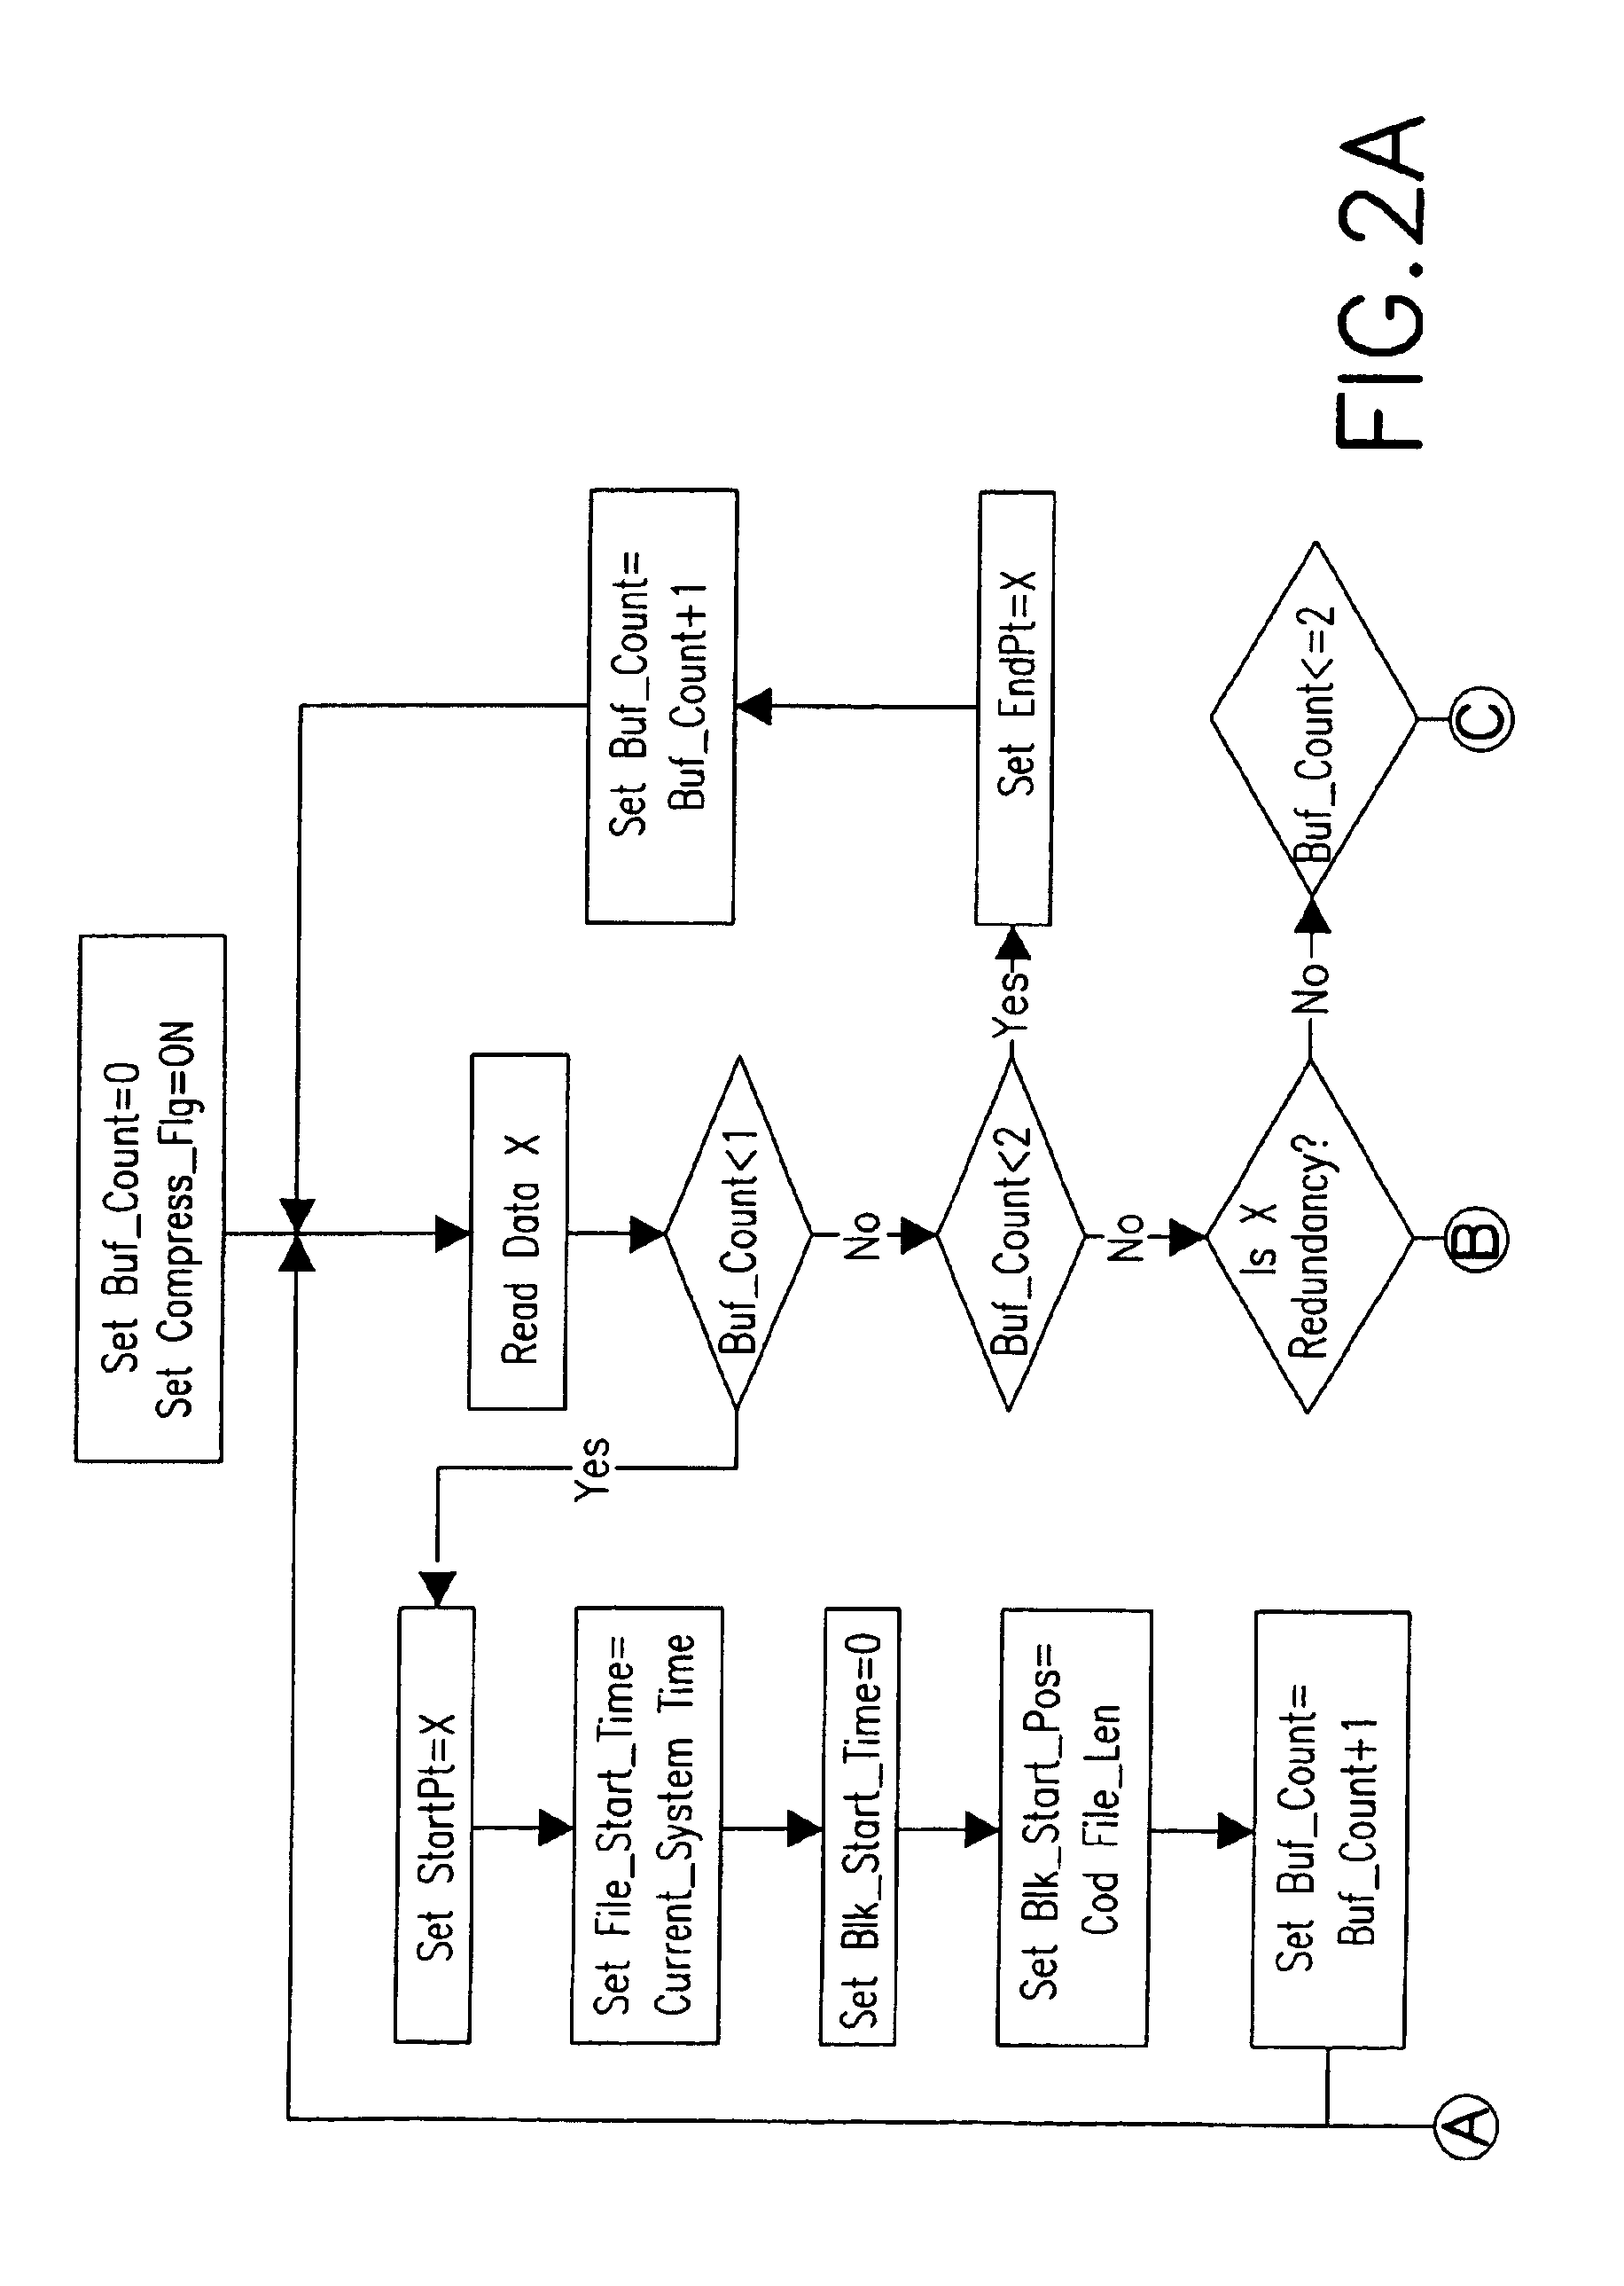 Real time date compression method and apparatus for a data recorder